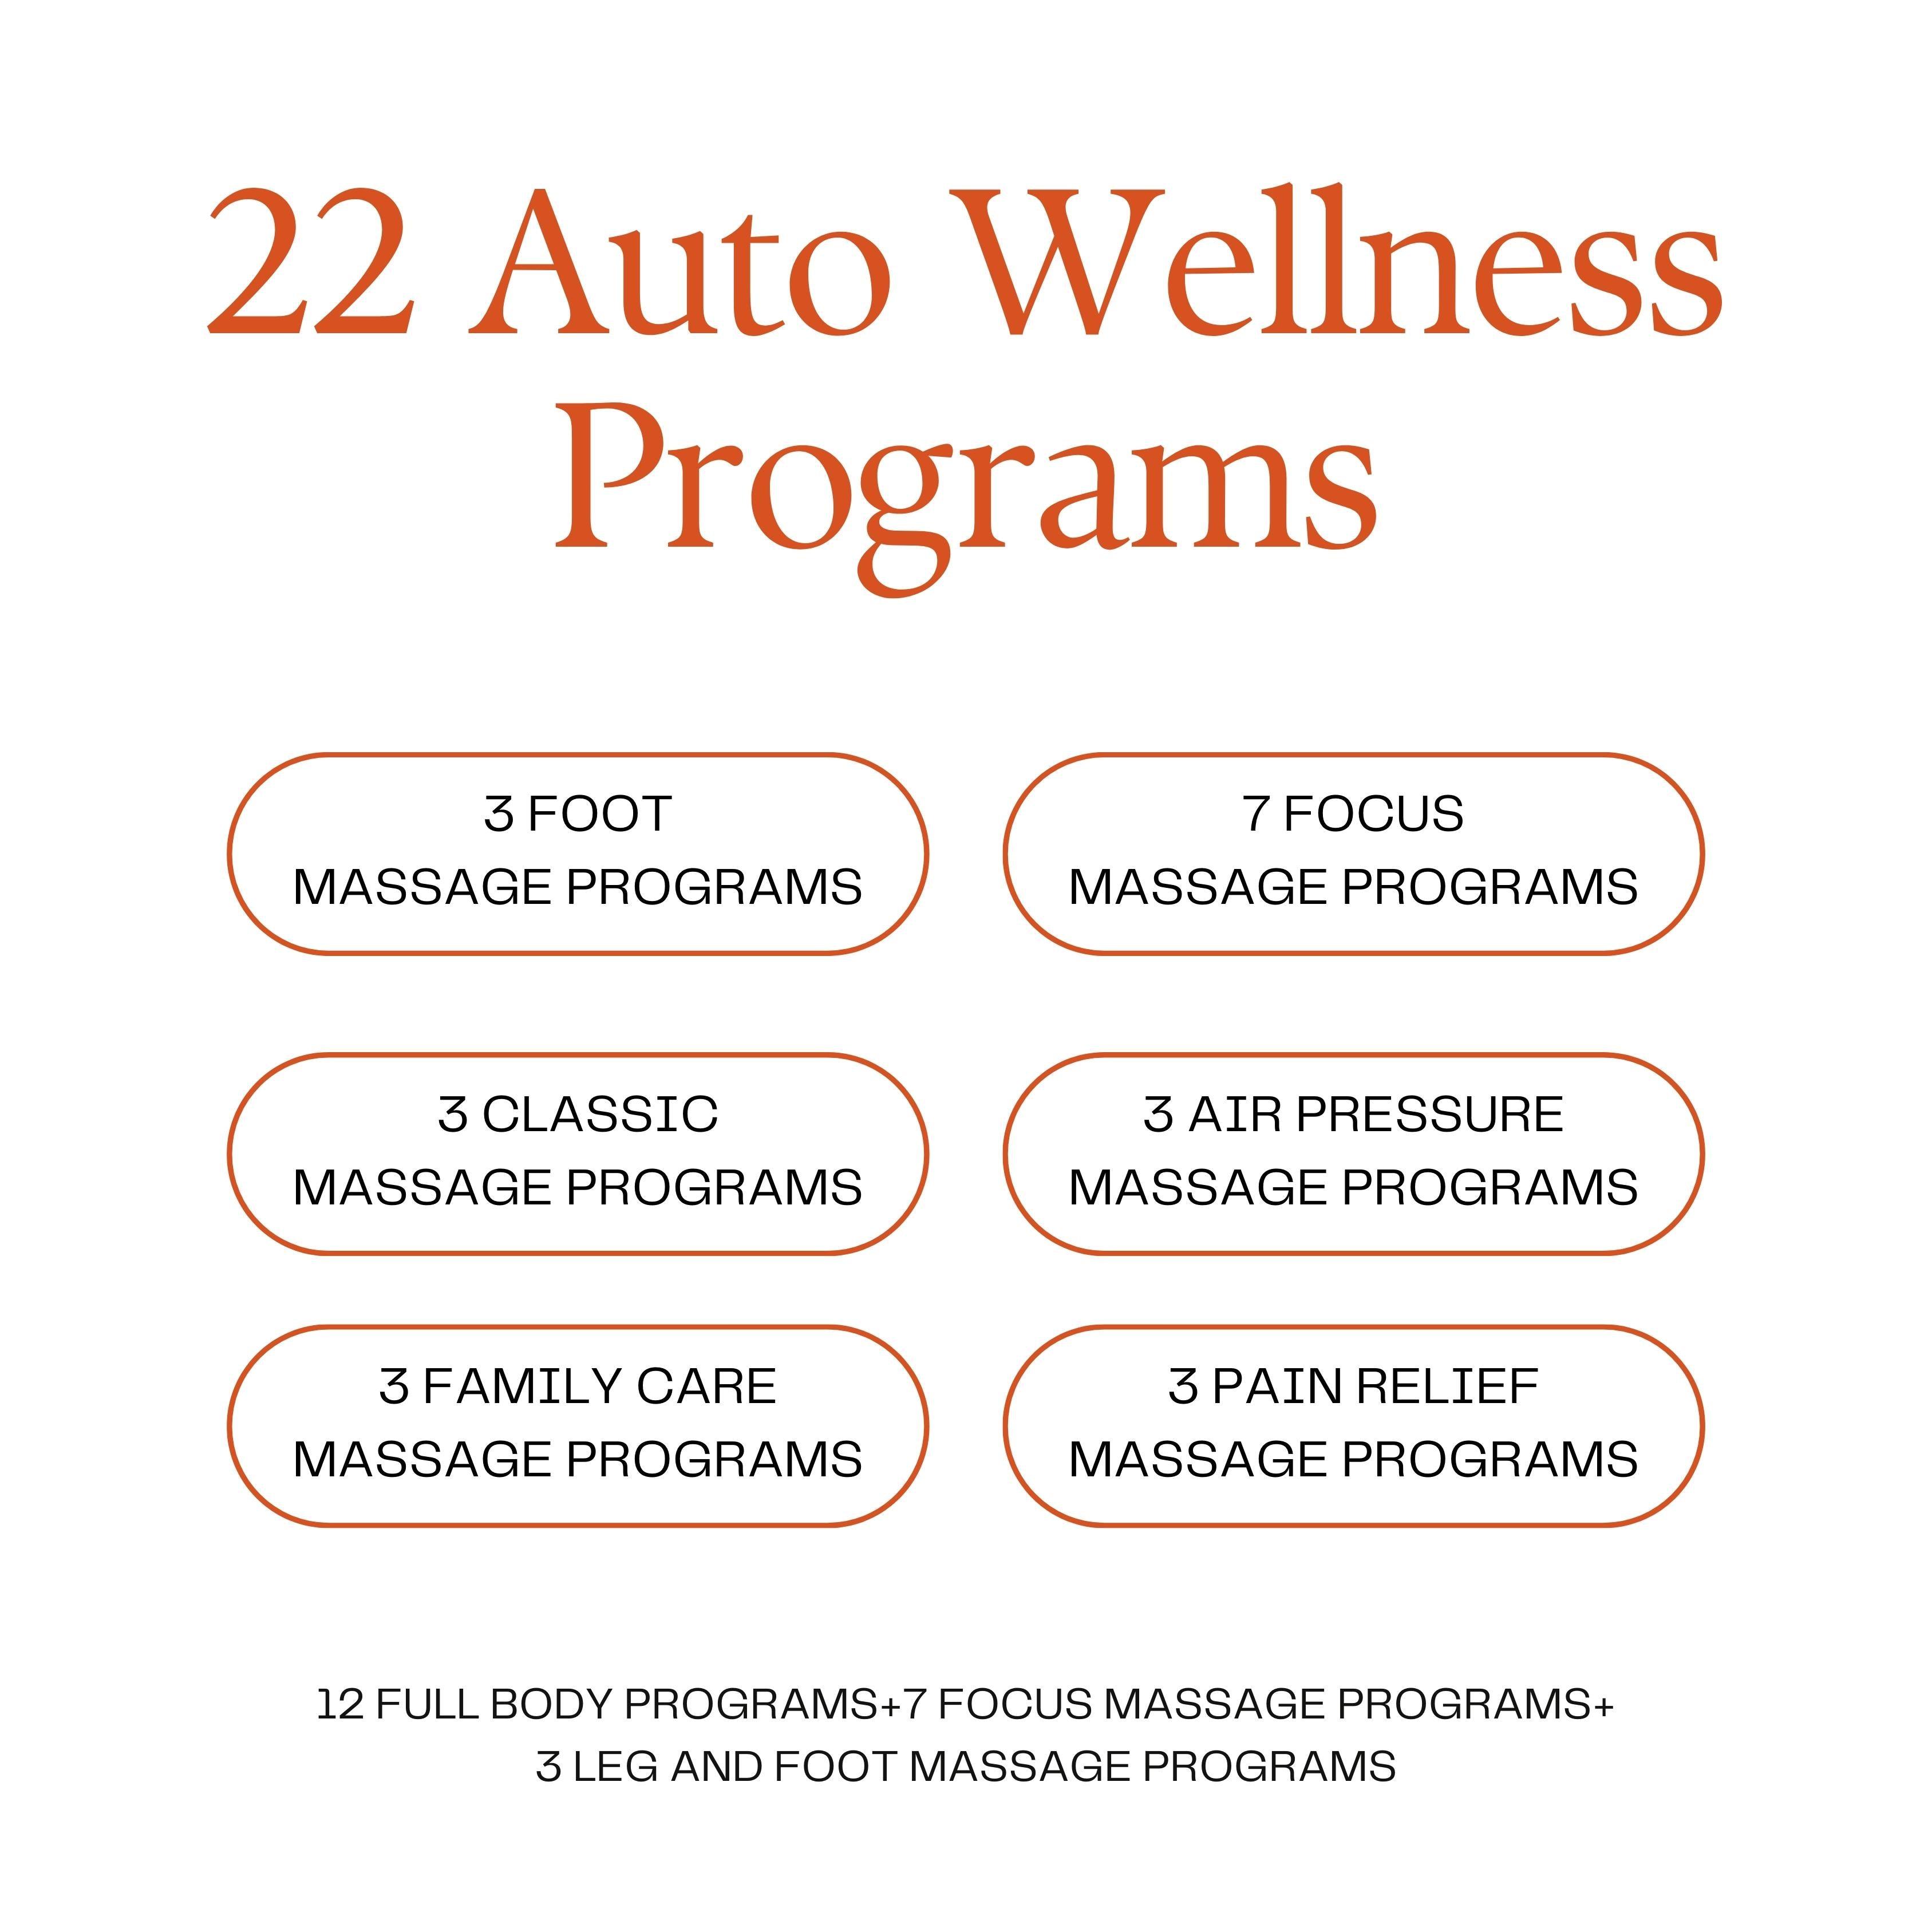 22 auto wellness programs including foot, focus, classic, air pressure, family care, and pain relief massage programs, best massage chair uae, massage chair Dubai, massage chair uae, massage chair Saudi Arabia, كرسي التدليك, Best massage chair in Dubai UA